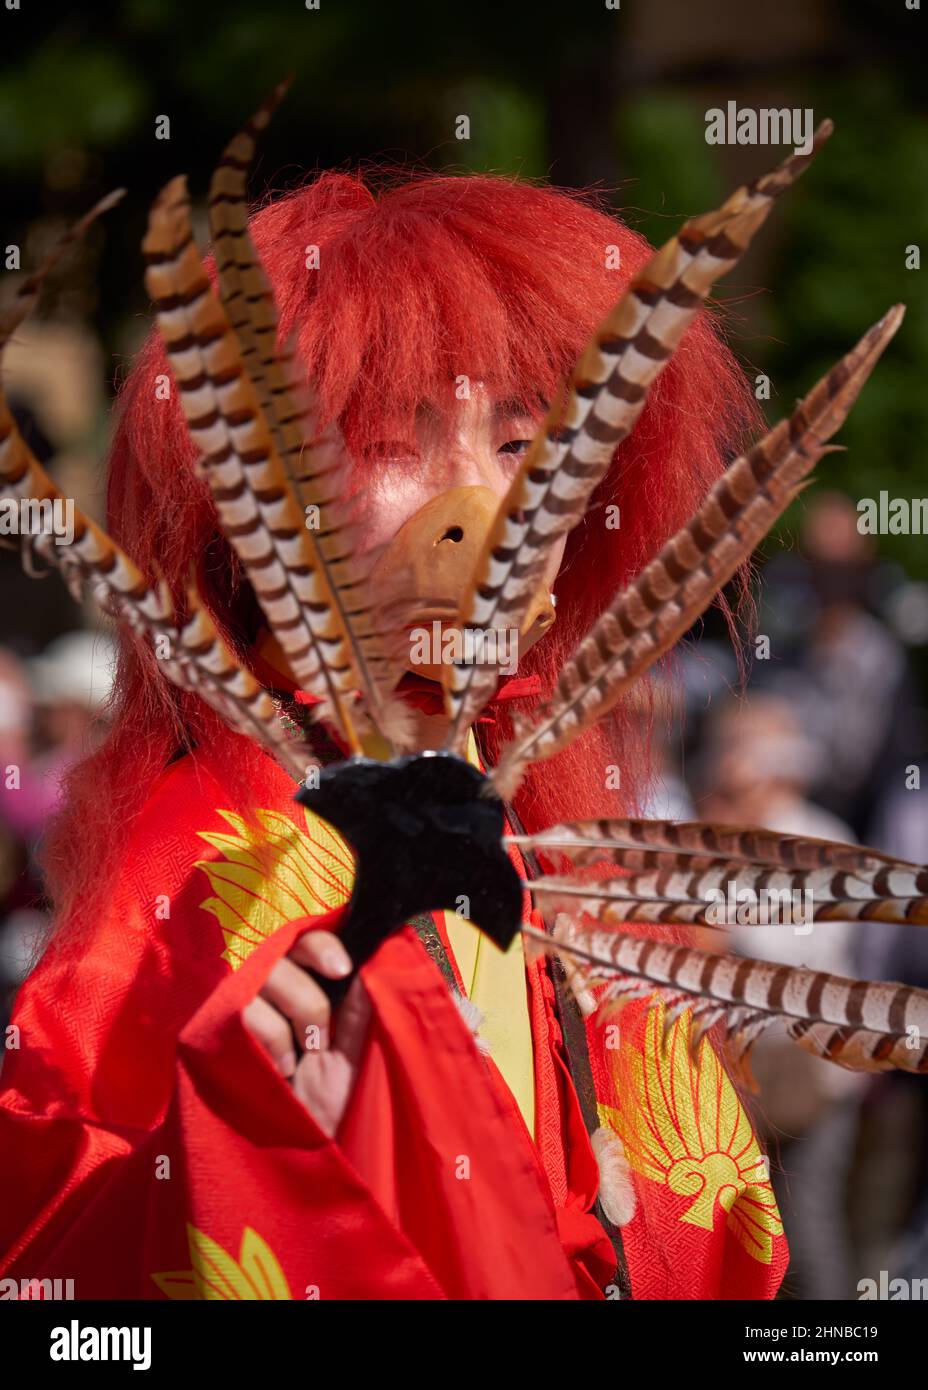 Nagoya, Japan – October 20, 2019: An actor wearing traditional tengu costume of a a bird like creatures holding a magical feather fan (hauchiwa) at th Stock Photo